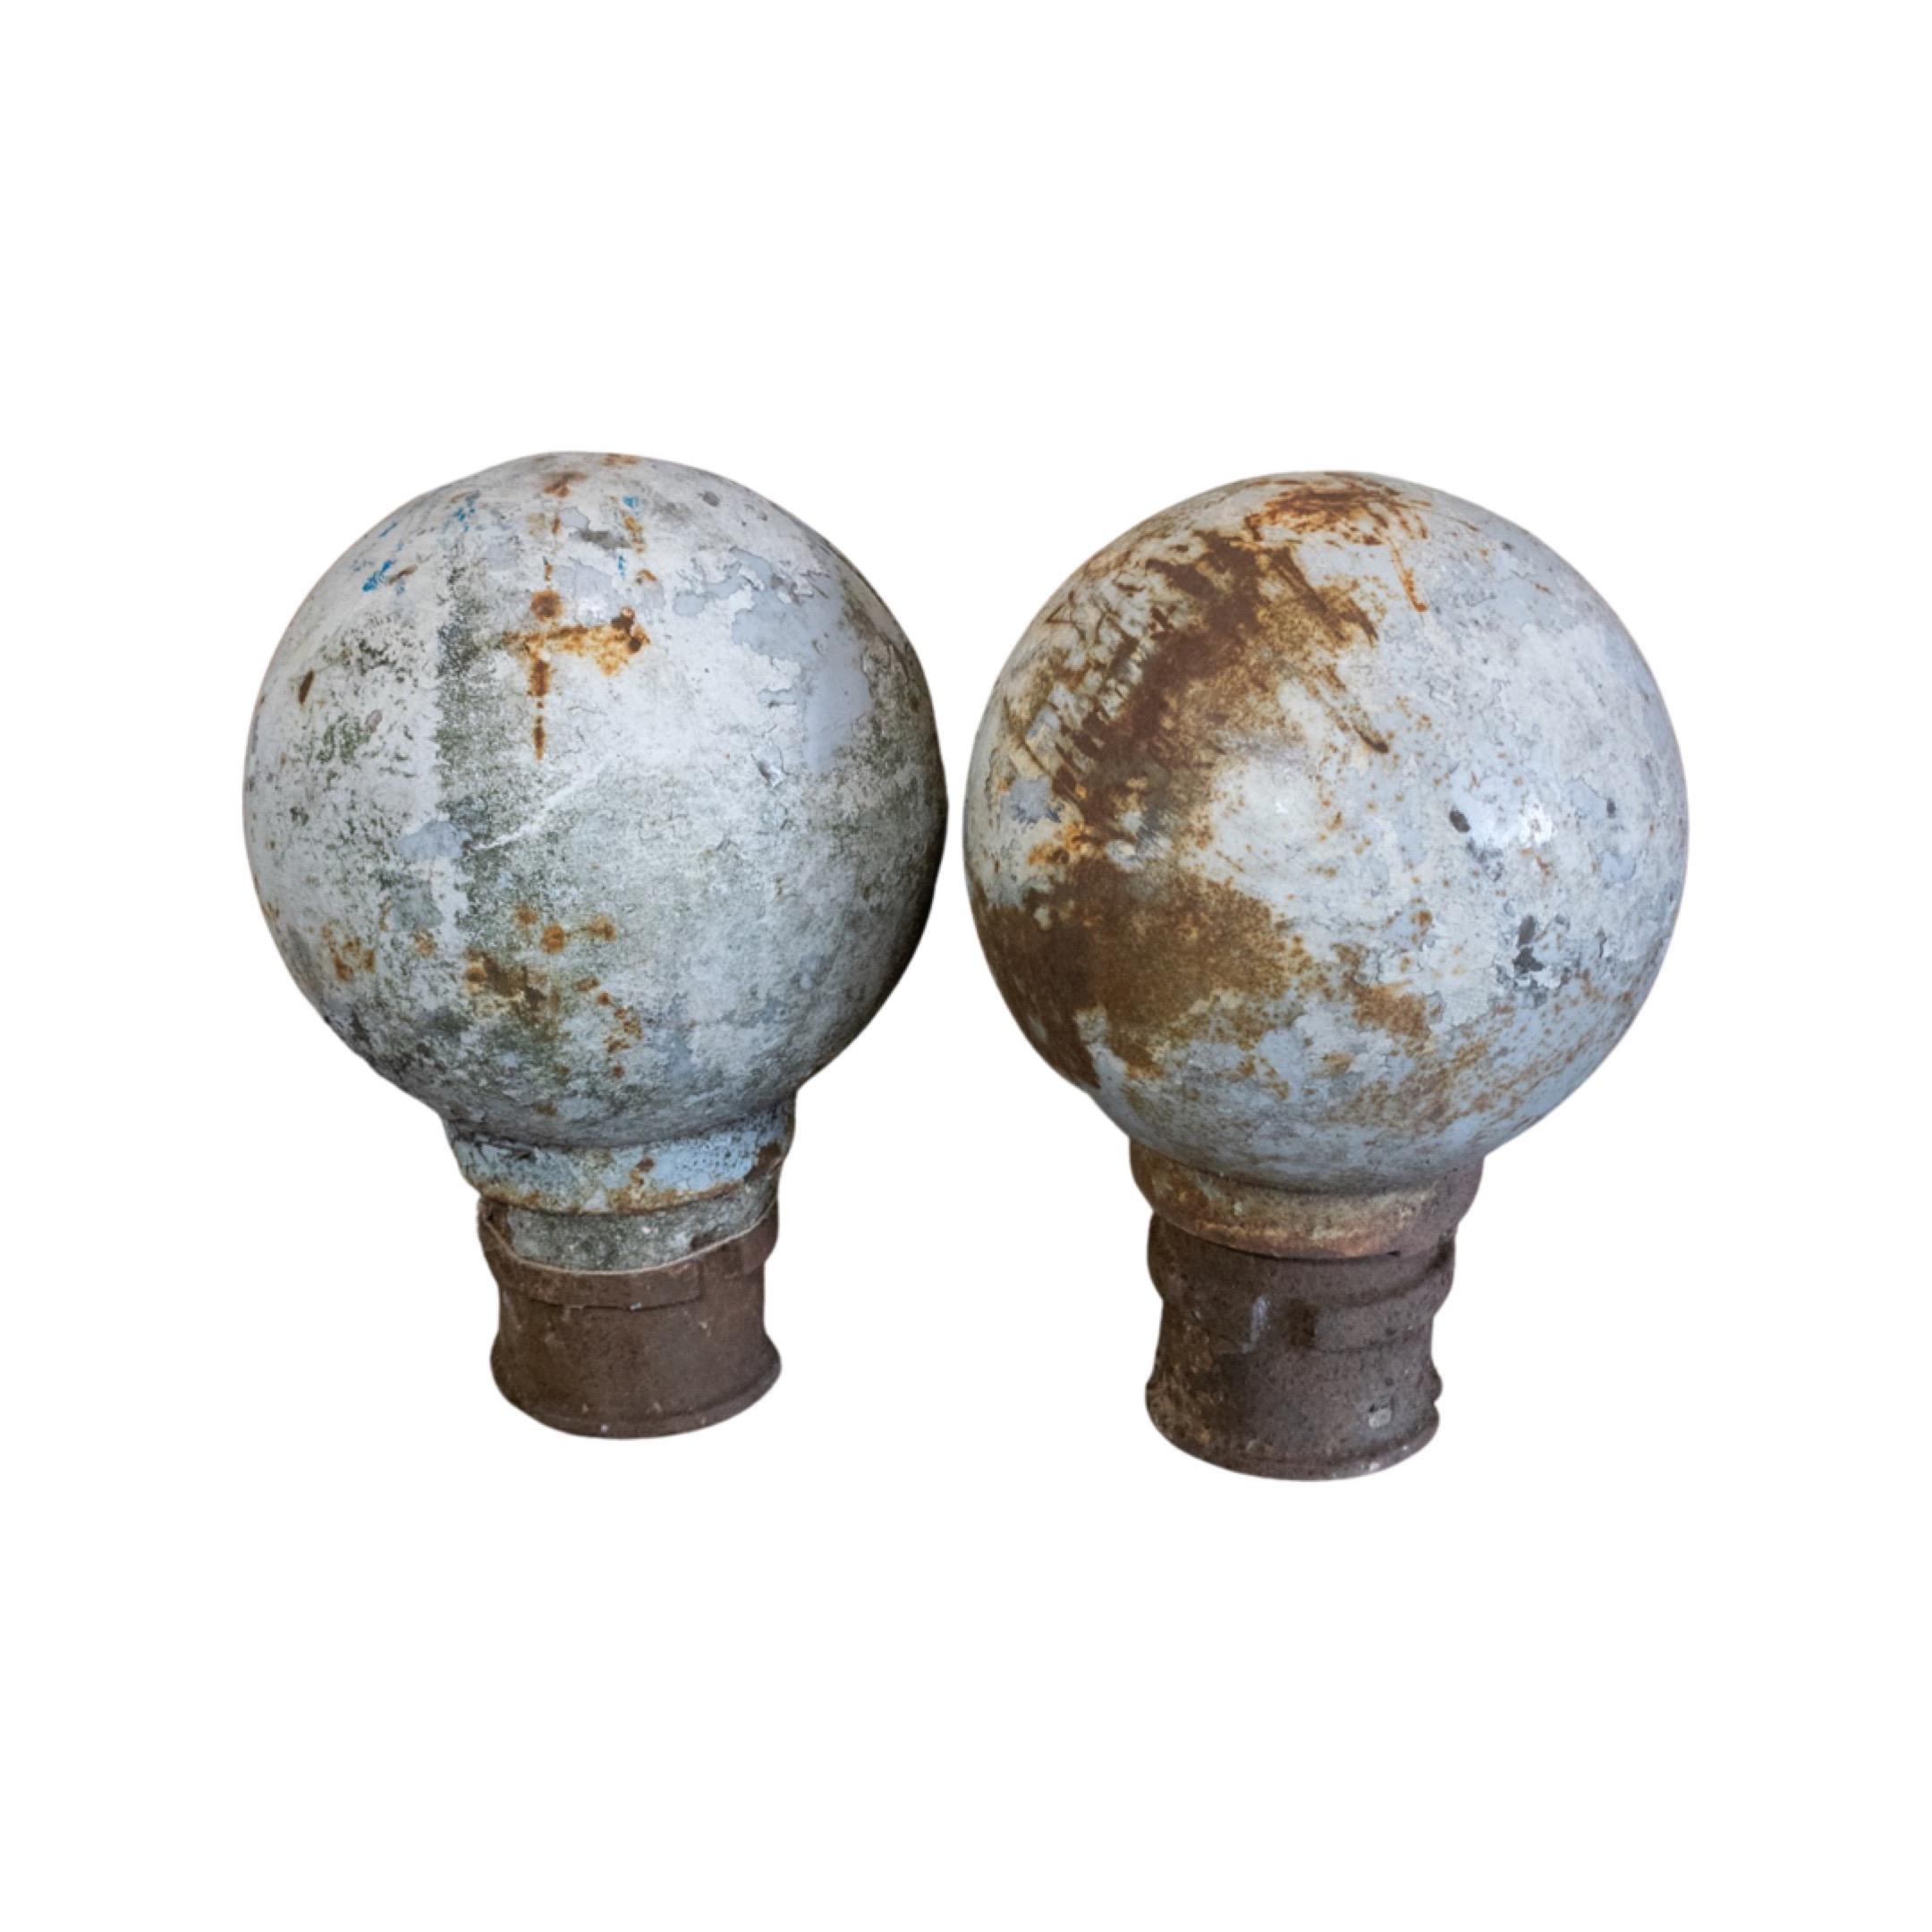 Pair of rustic round ball finials. Originates from France. Circa, 1880's. Sold as a set of two.